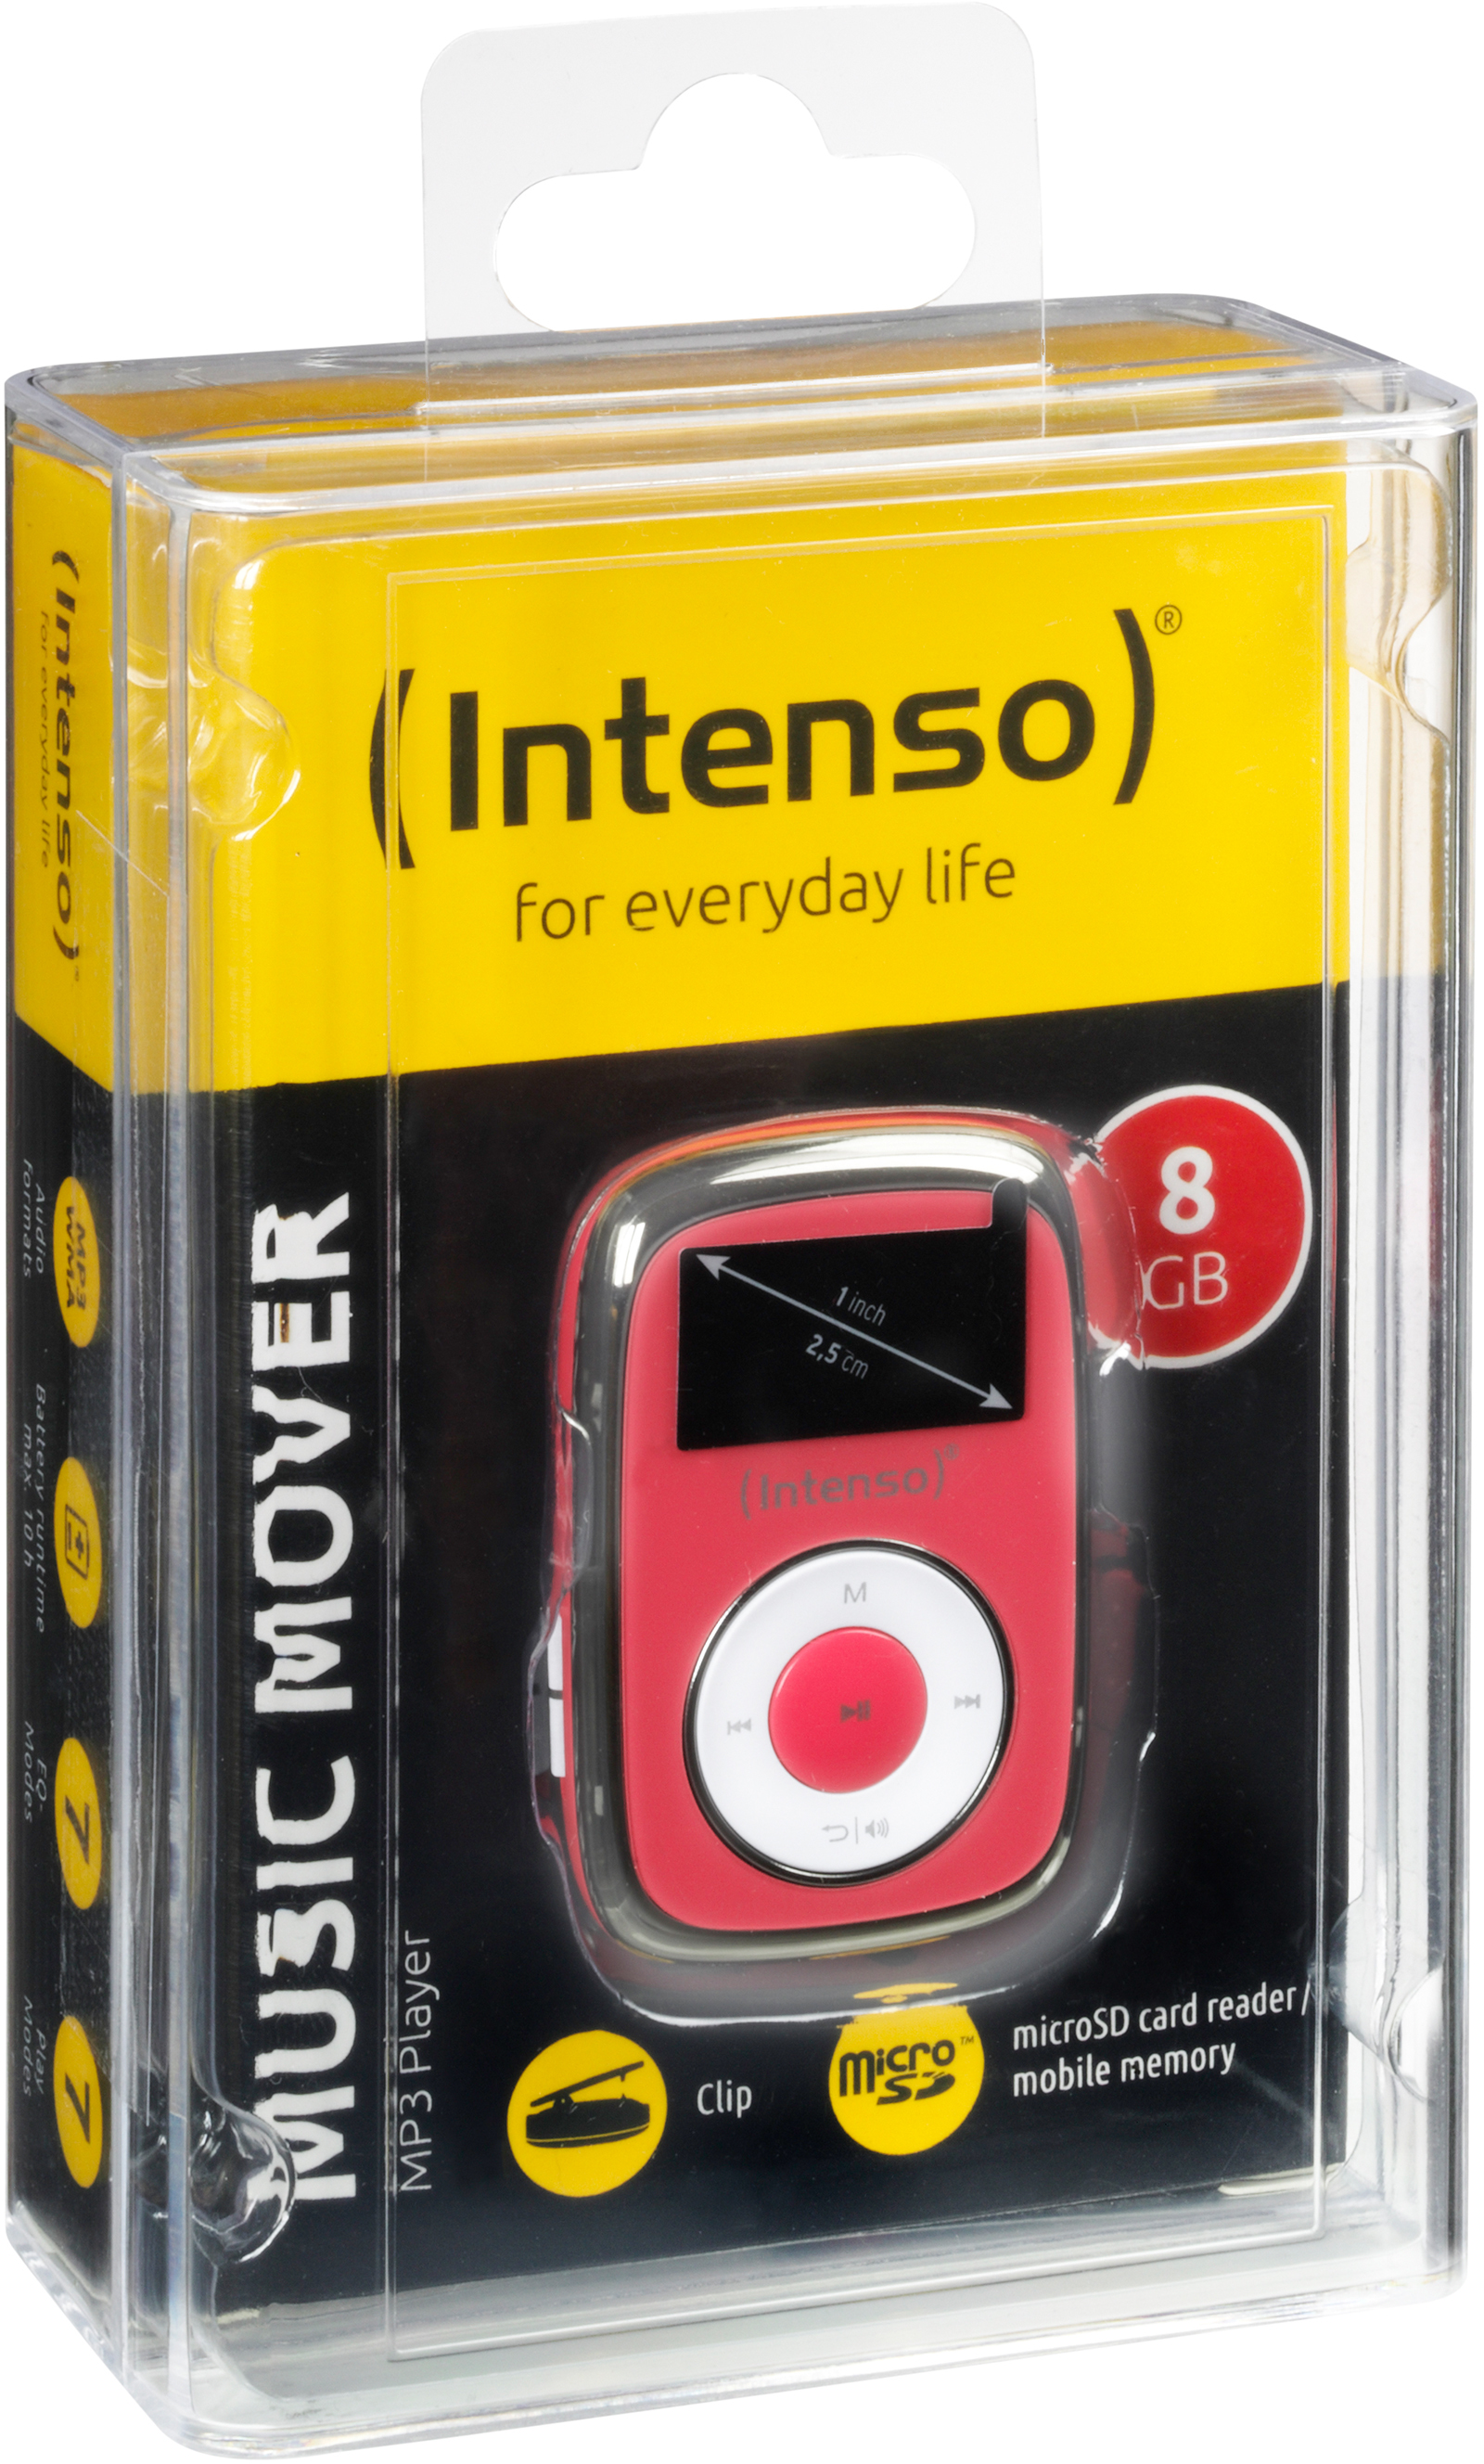 INTENSO GB, Pink) Music (8 Mover Mp3-Player